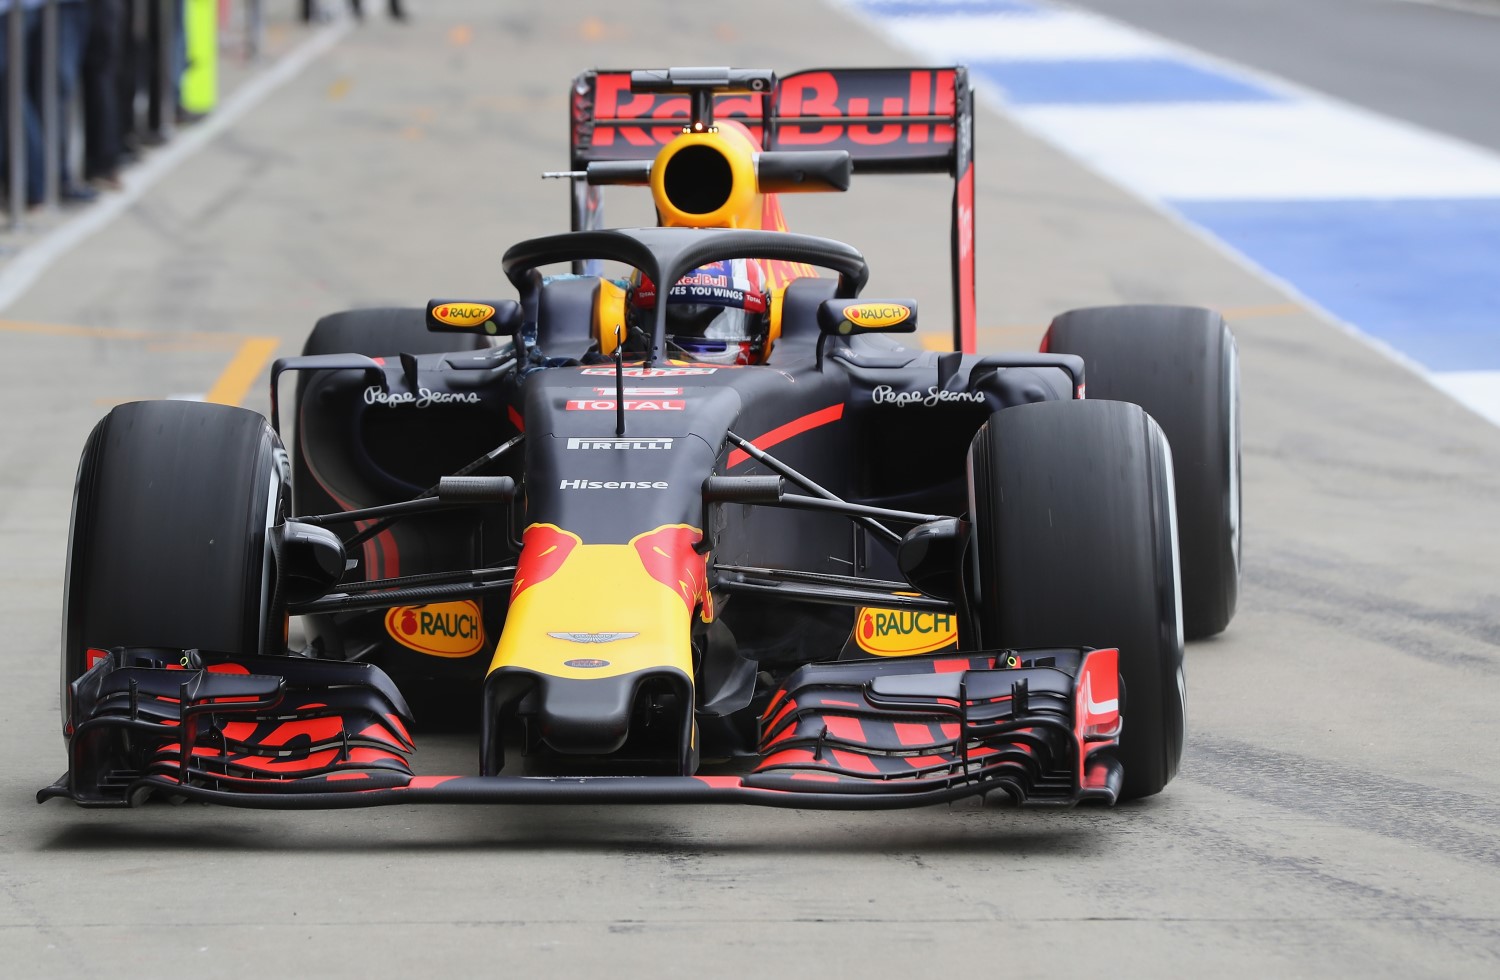 The Halo on the Red Bull